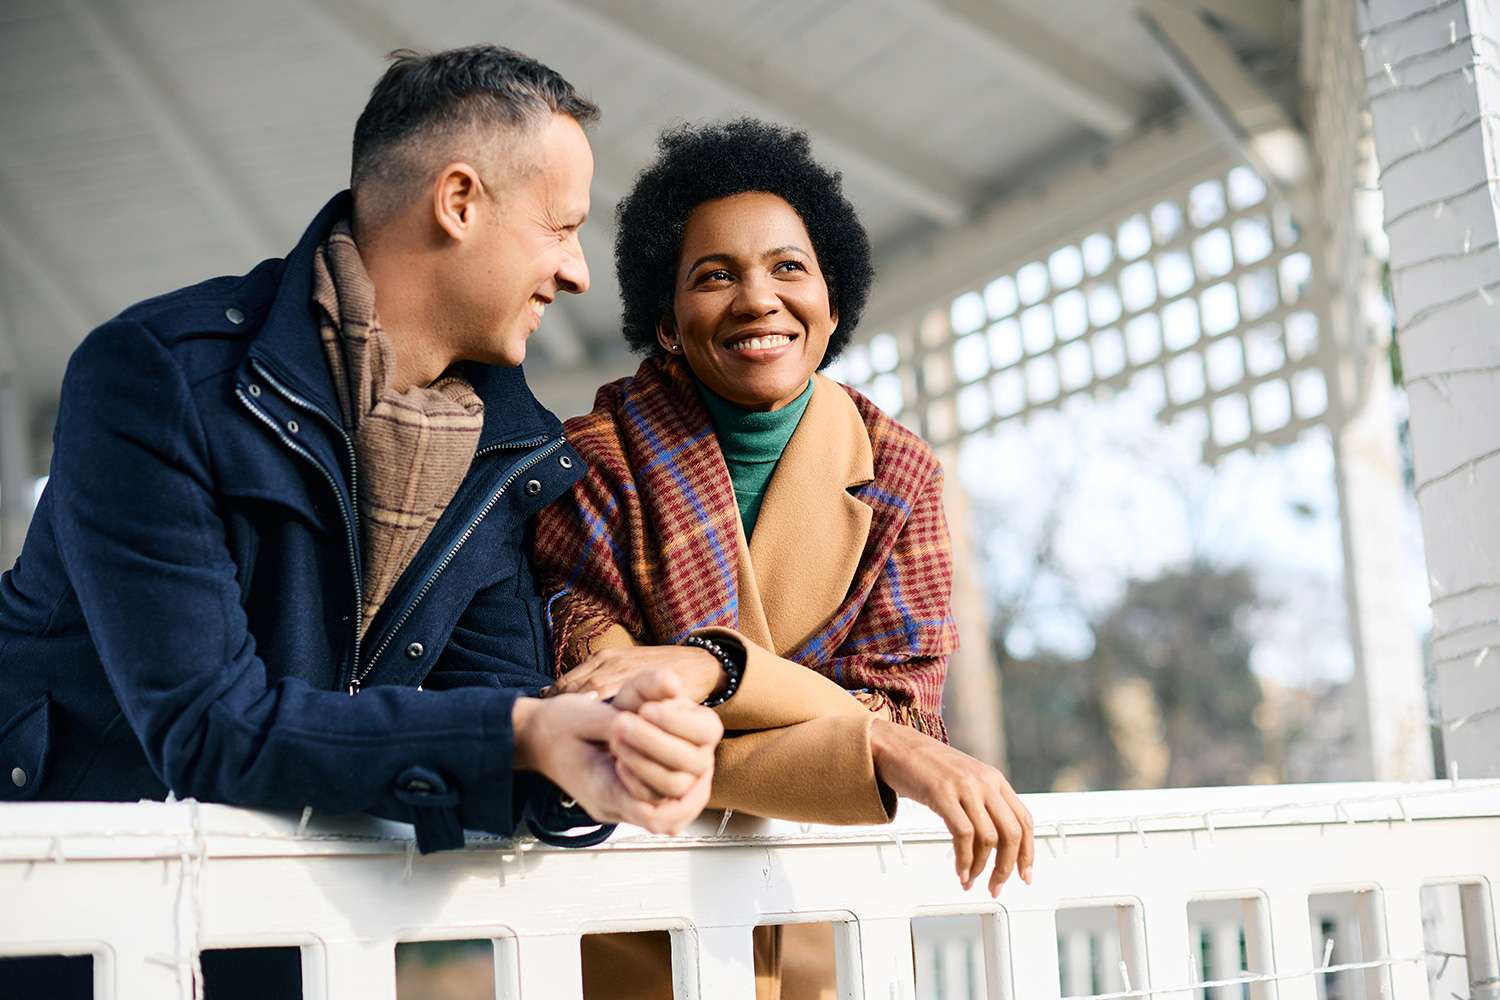 A delightful image captures a happy couple on a porch, featured in a blog discussing the procedure of Ultrasound-Guided Fine-Needle Aspiration Biopsy for the Thyroid and Neck Lymph Nodes.